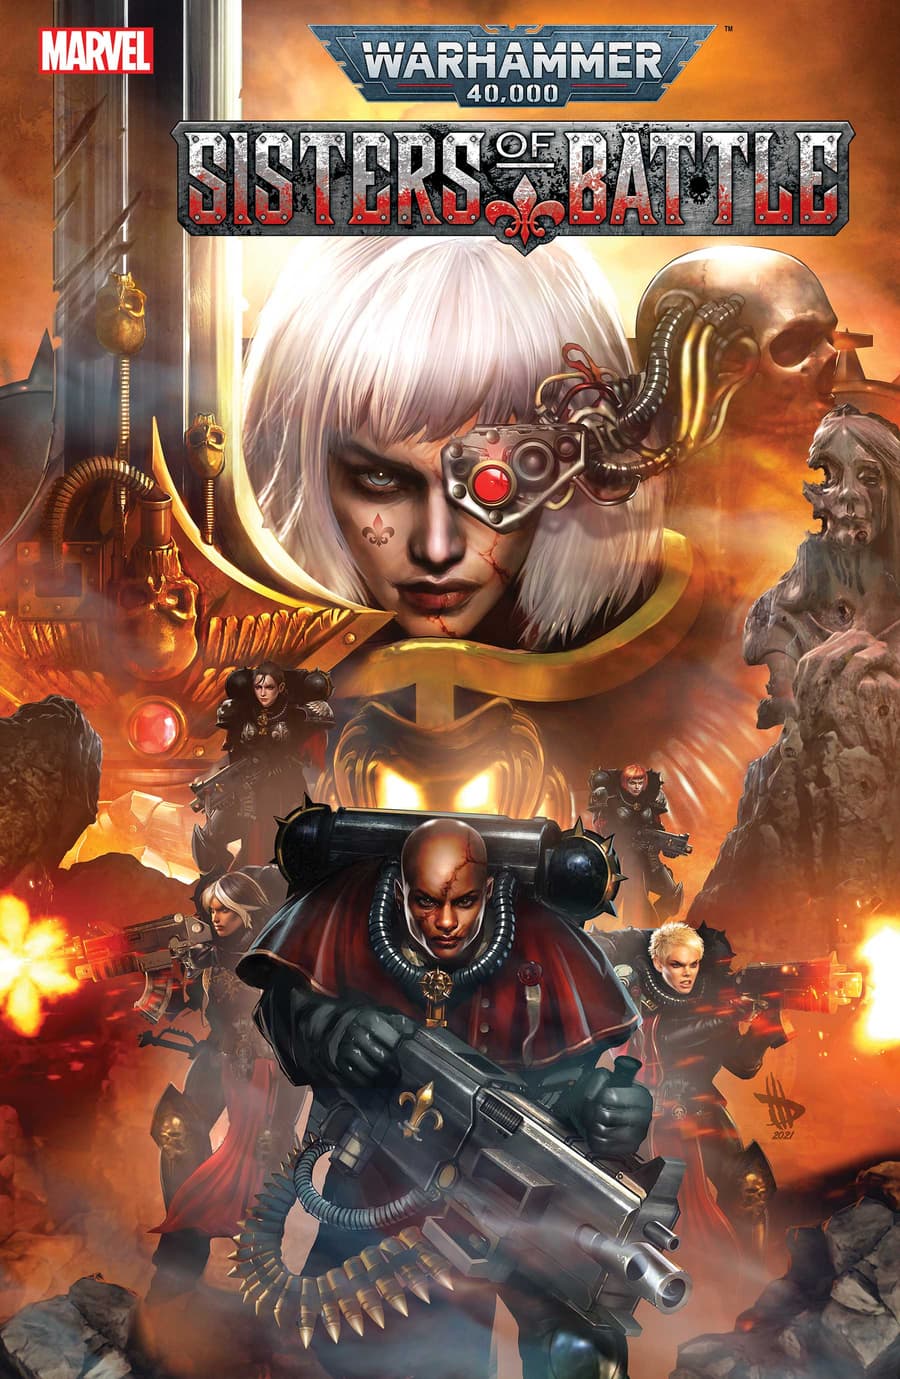 WARHAMMER 40,000: SISTERS OF BATTLE #1 cover by Dave Wilkins